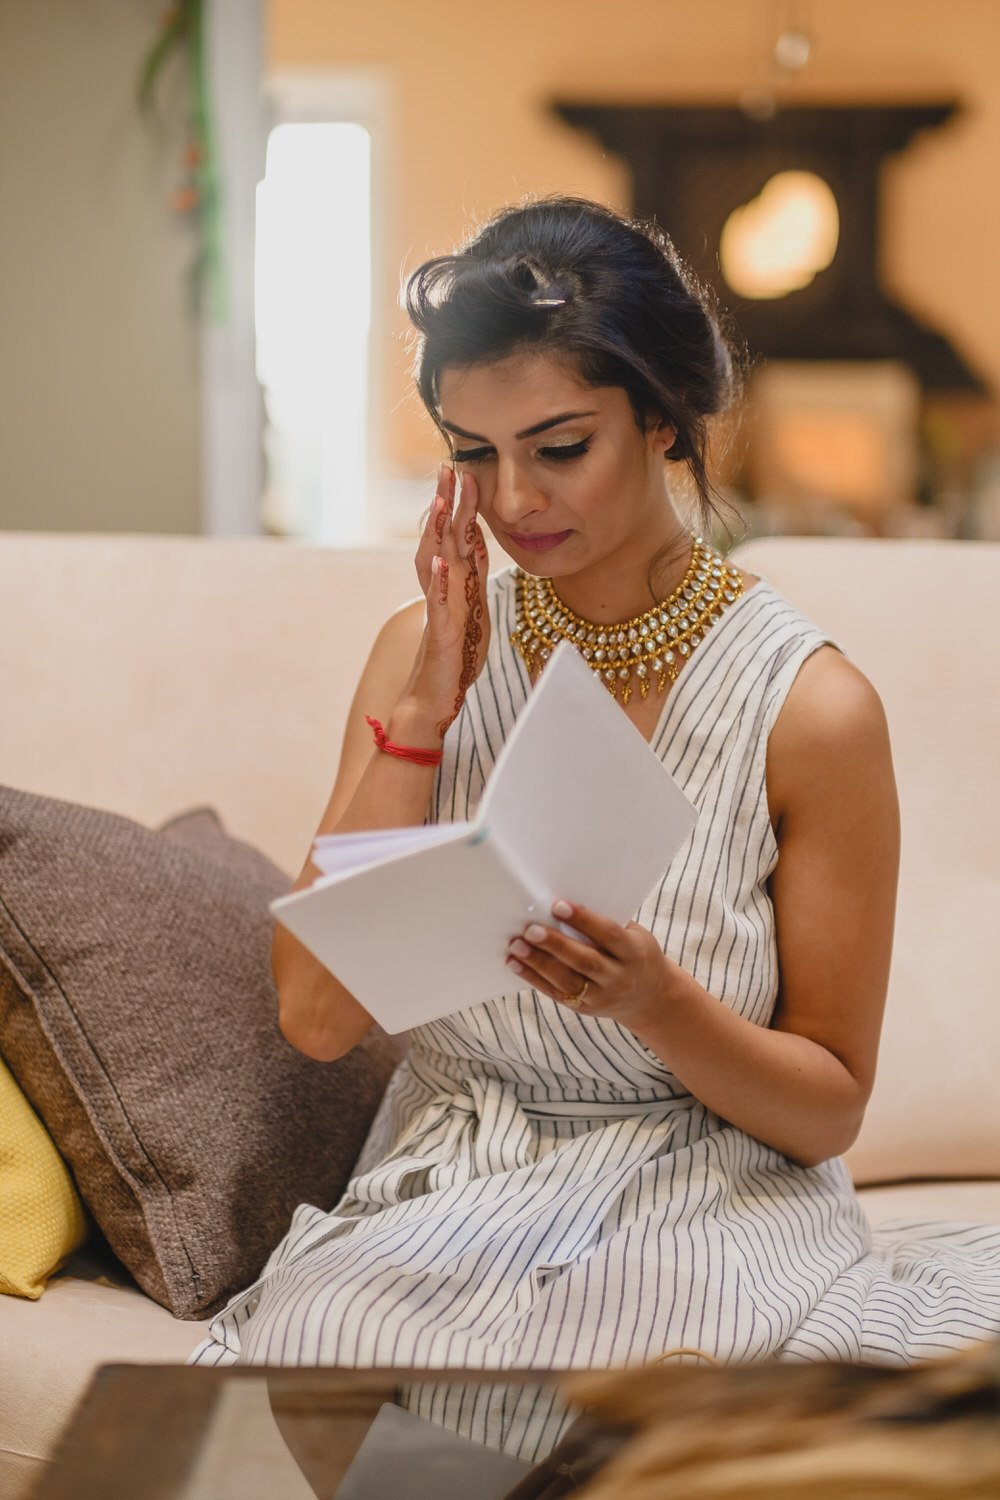 photo of a bride crying as she reads a card from her groom